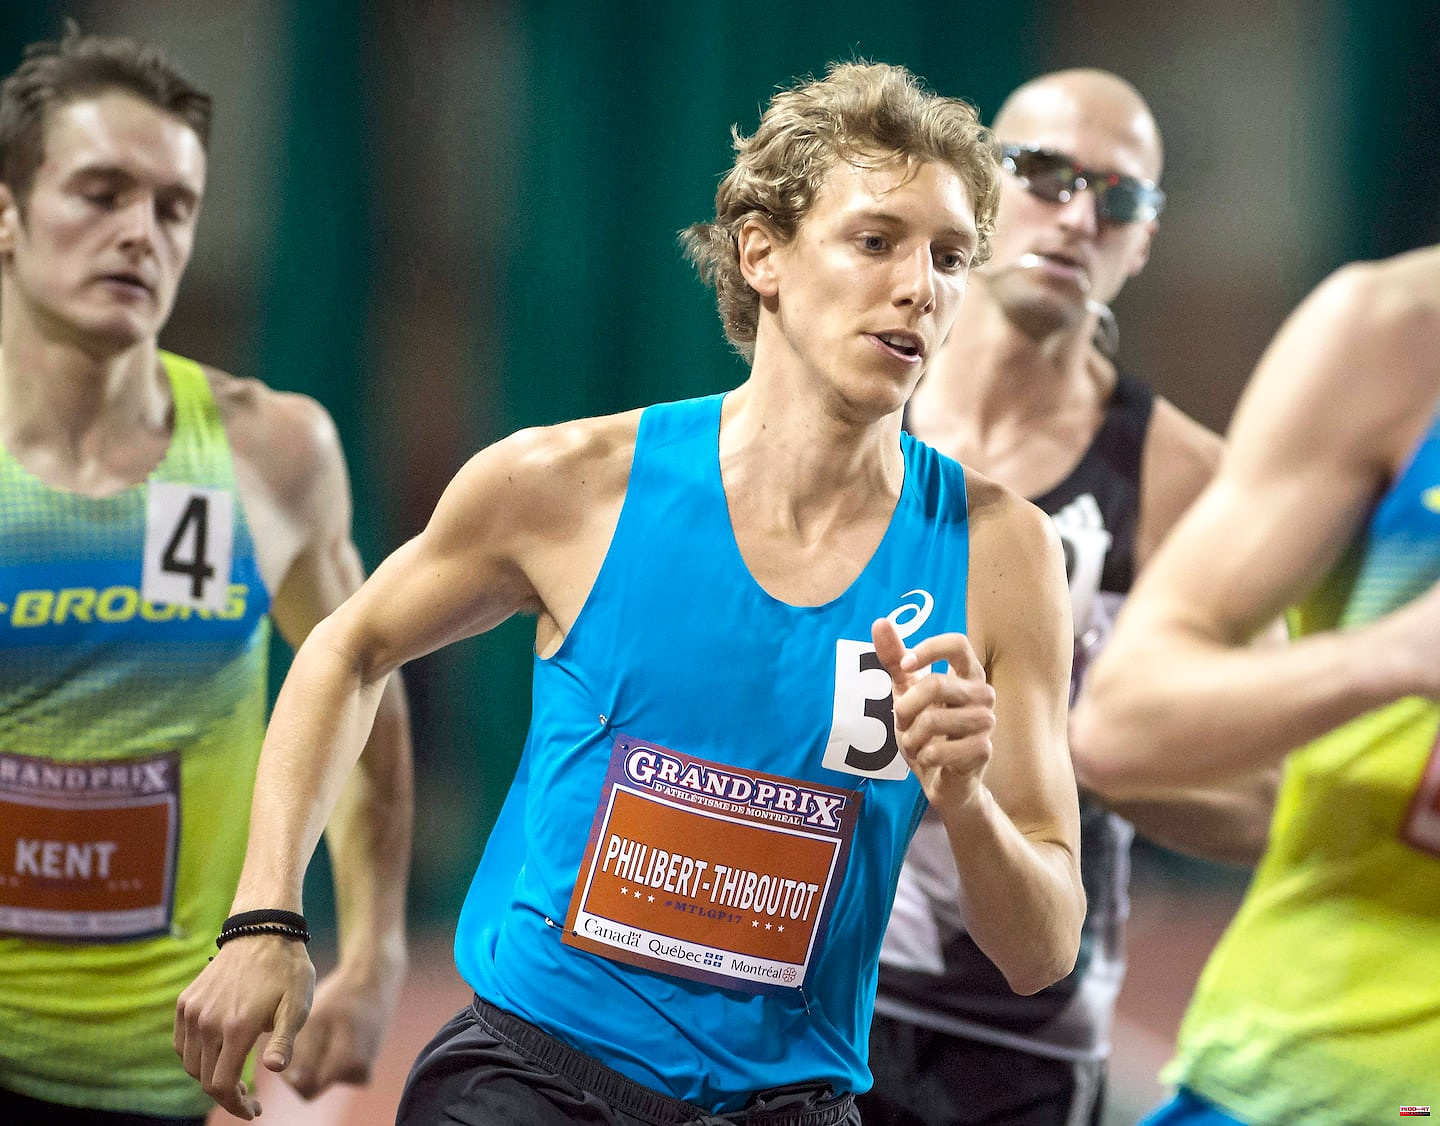 Two birds with one stone for Charles Philibert-Thiboutot